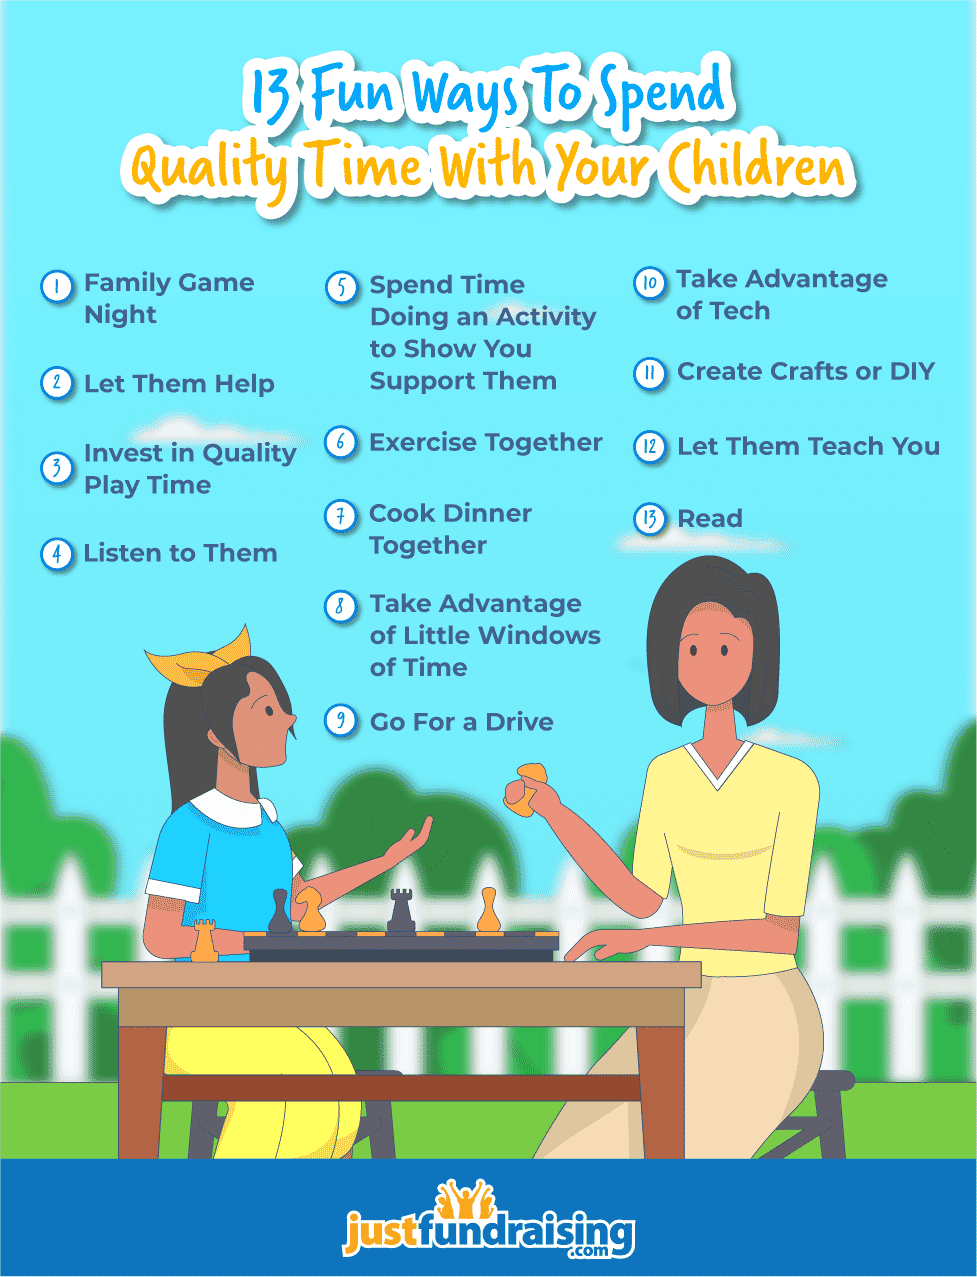 13 ways to spend quality time with your children infographic